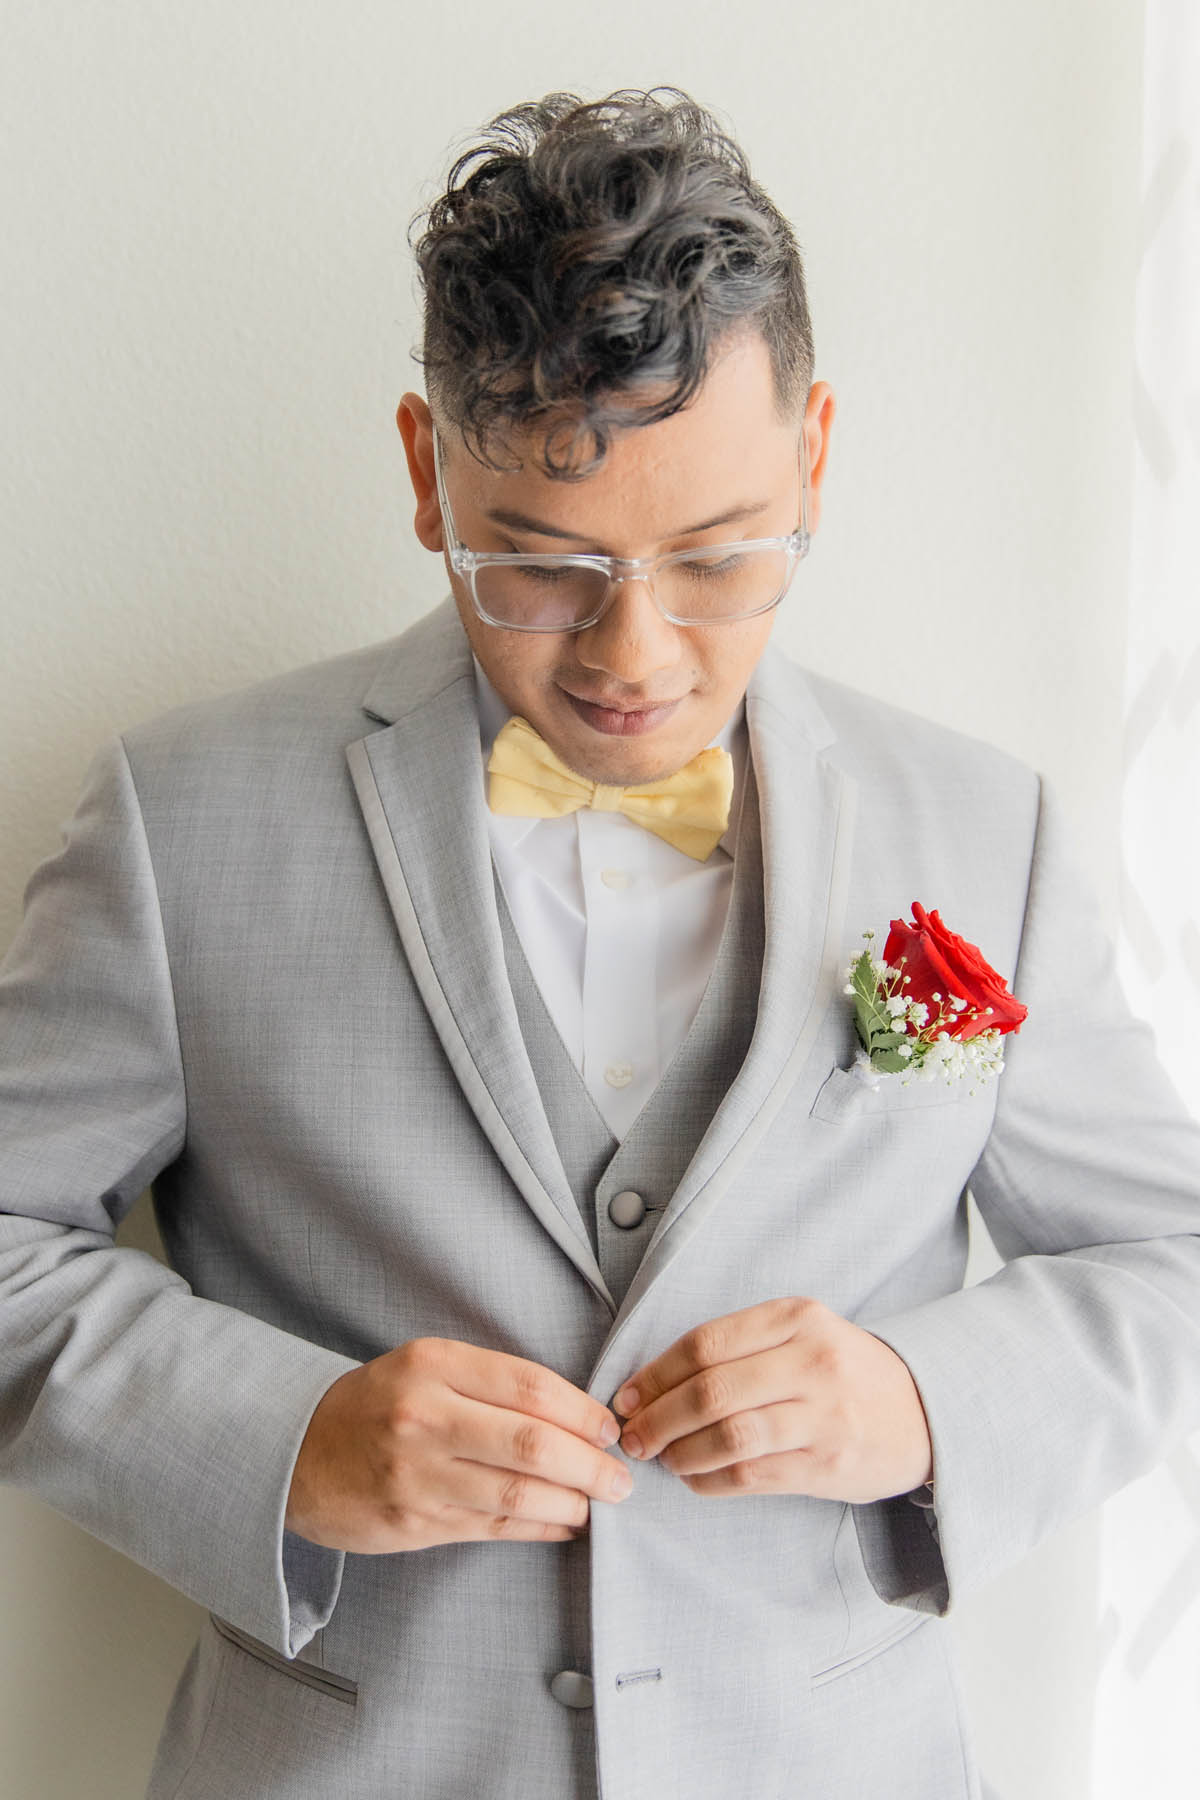 A Latinx groom buttons the top button of his gray suit. He is wearing clear frame glasses and a yellow bowtie.